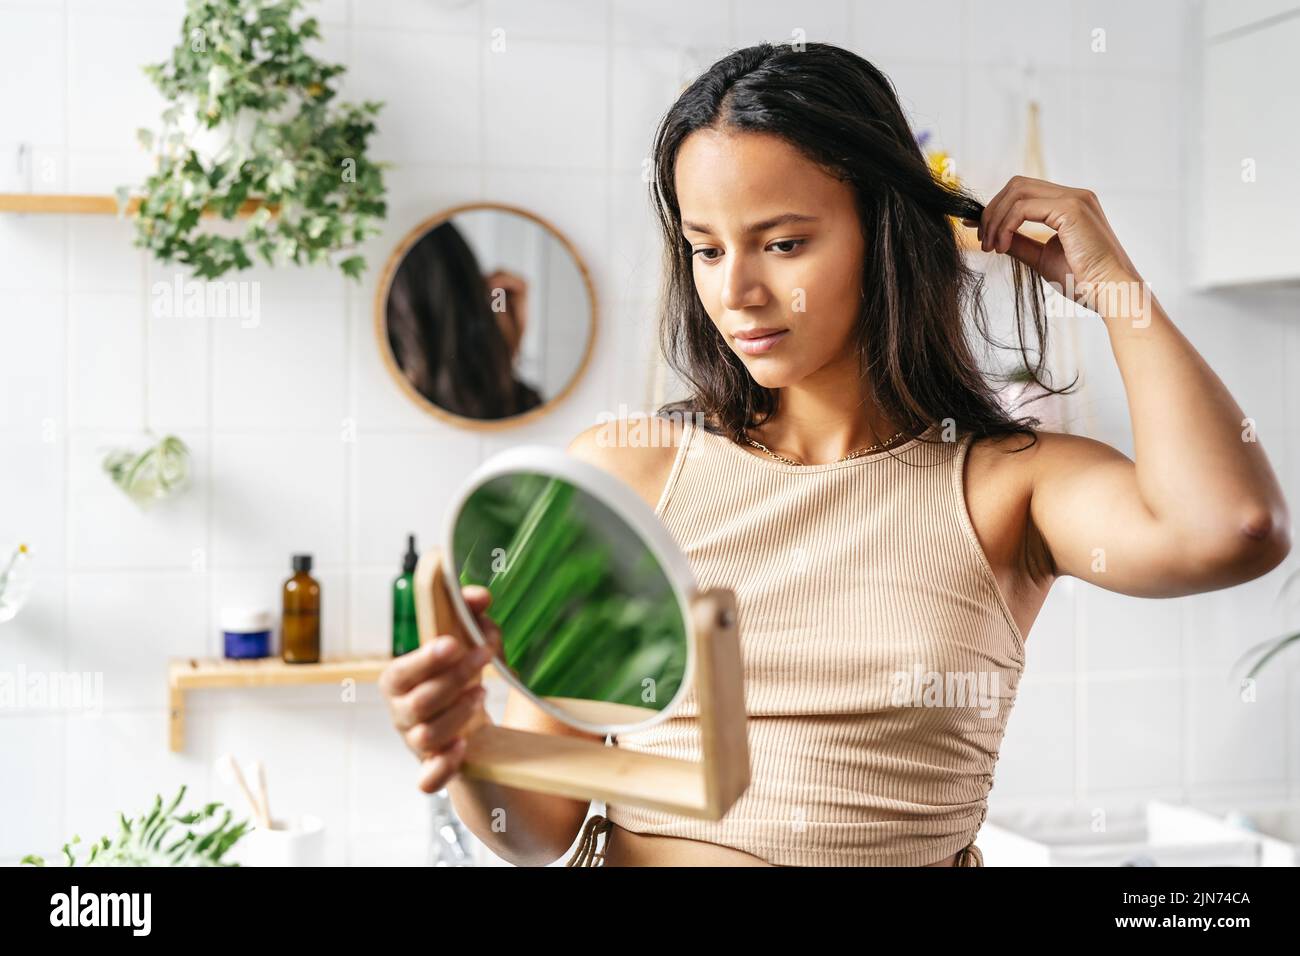 Young beautiful woman with dark skin looking into face mirror. Wellness, self-care concept Stock Photo